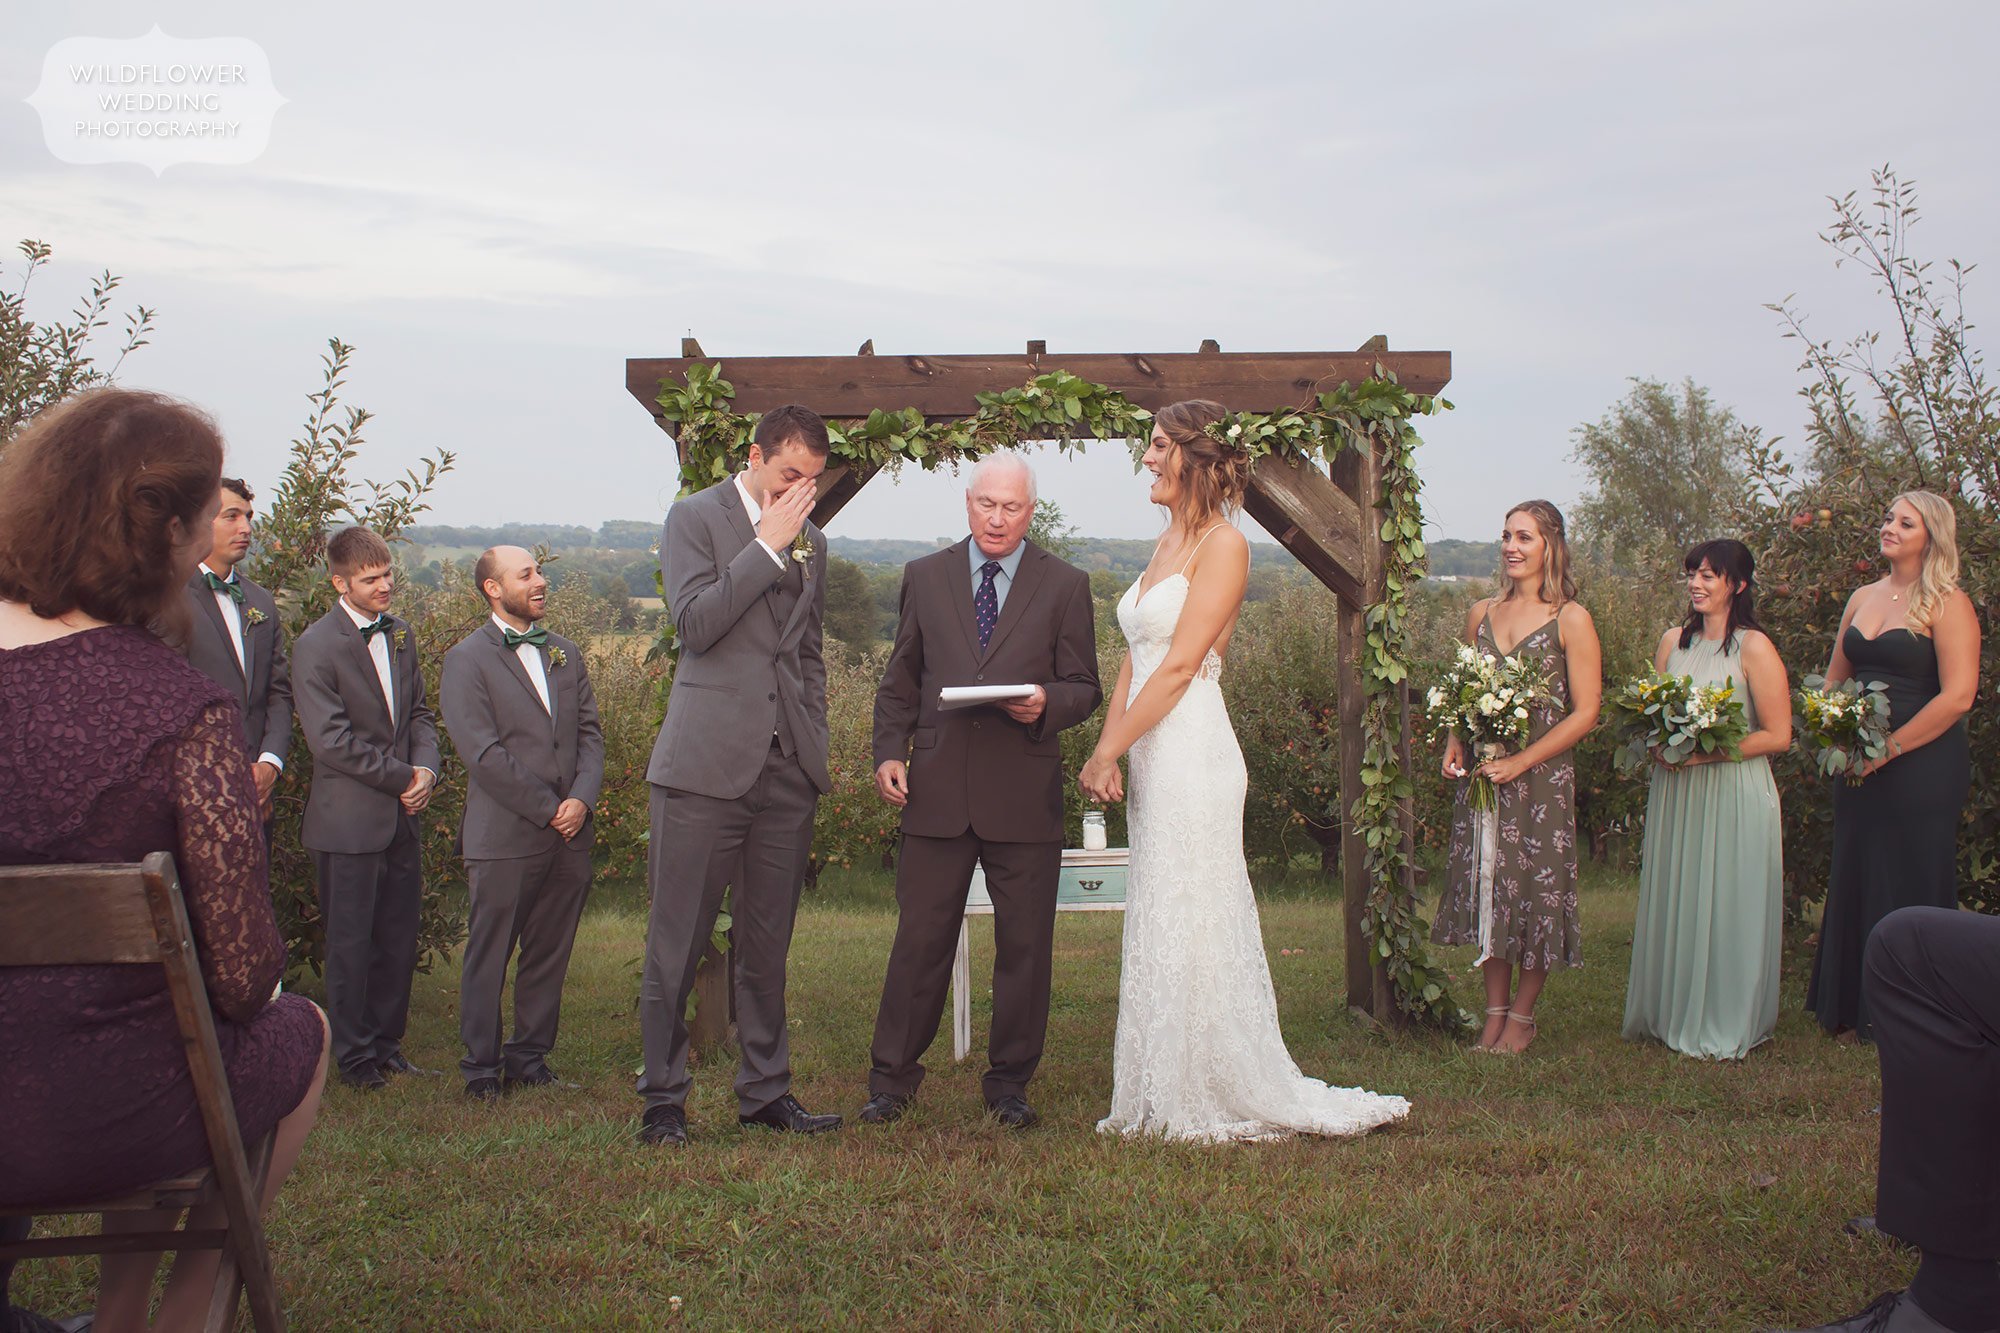 Emotional moment of the groom covering his face during the outdoor ceremony in Weston, MO.